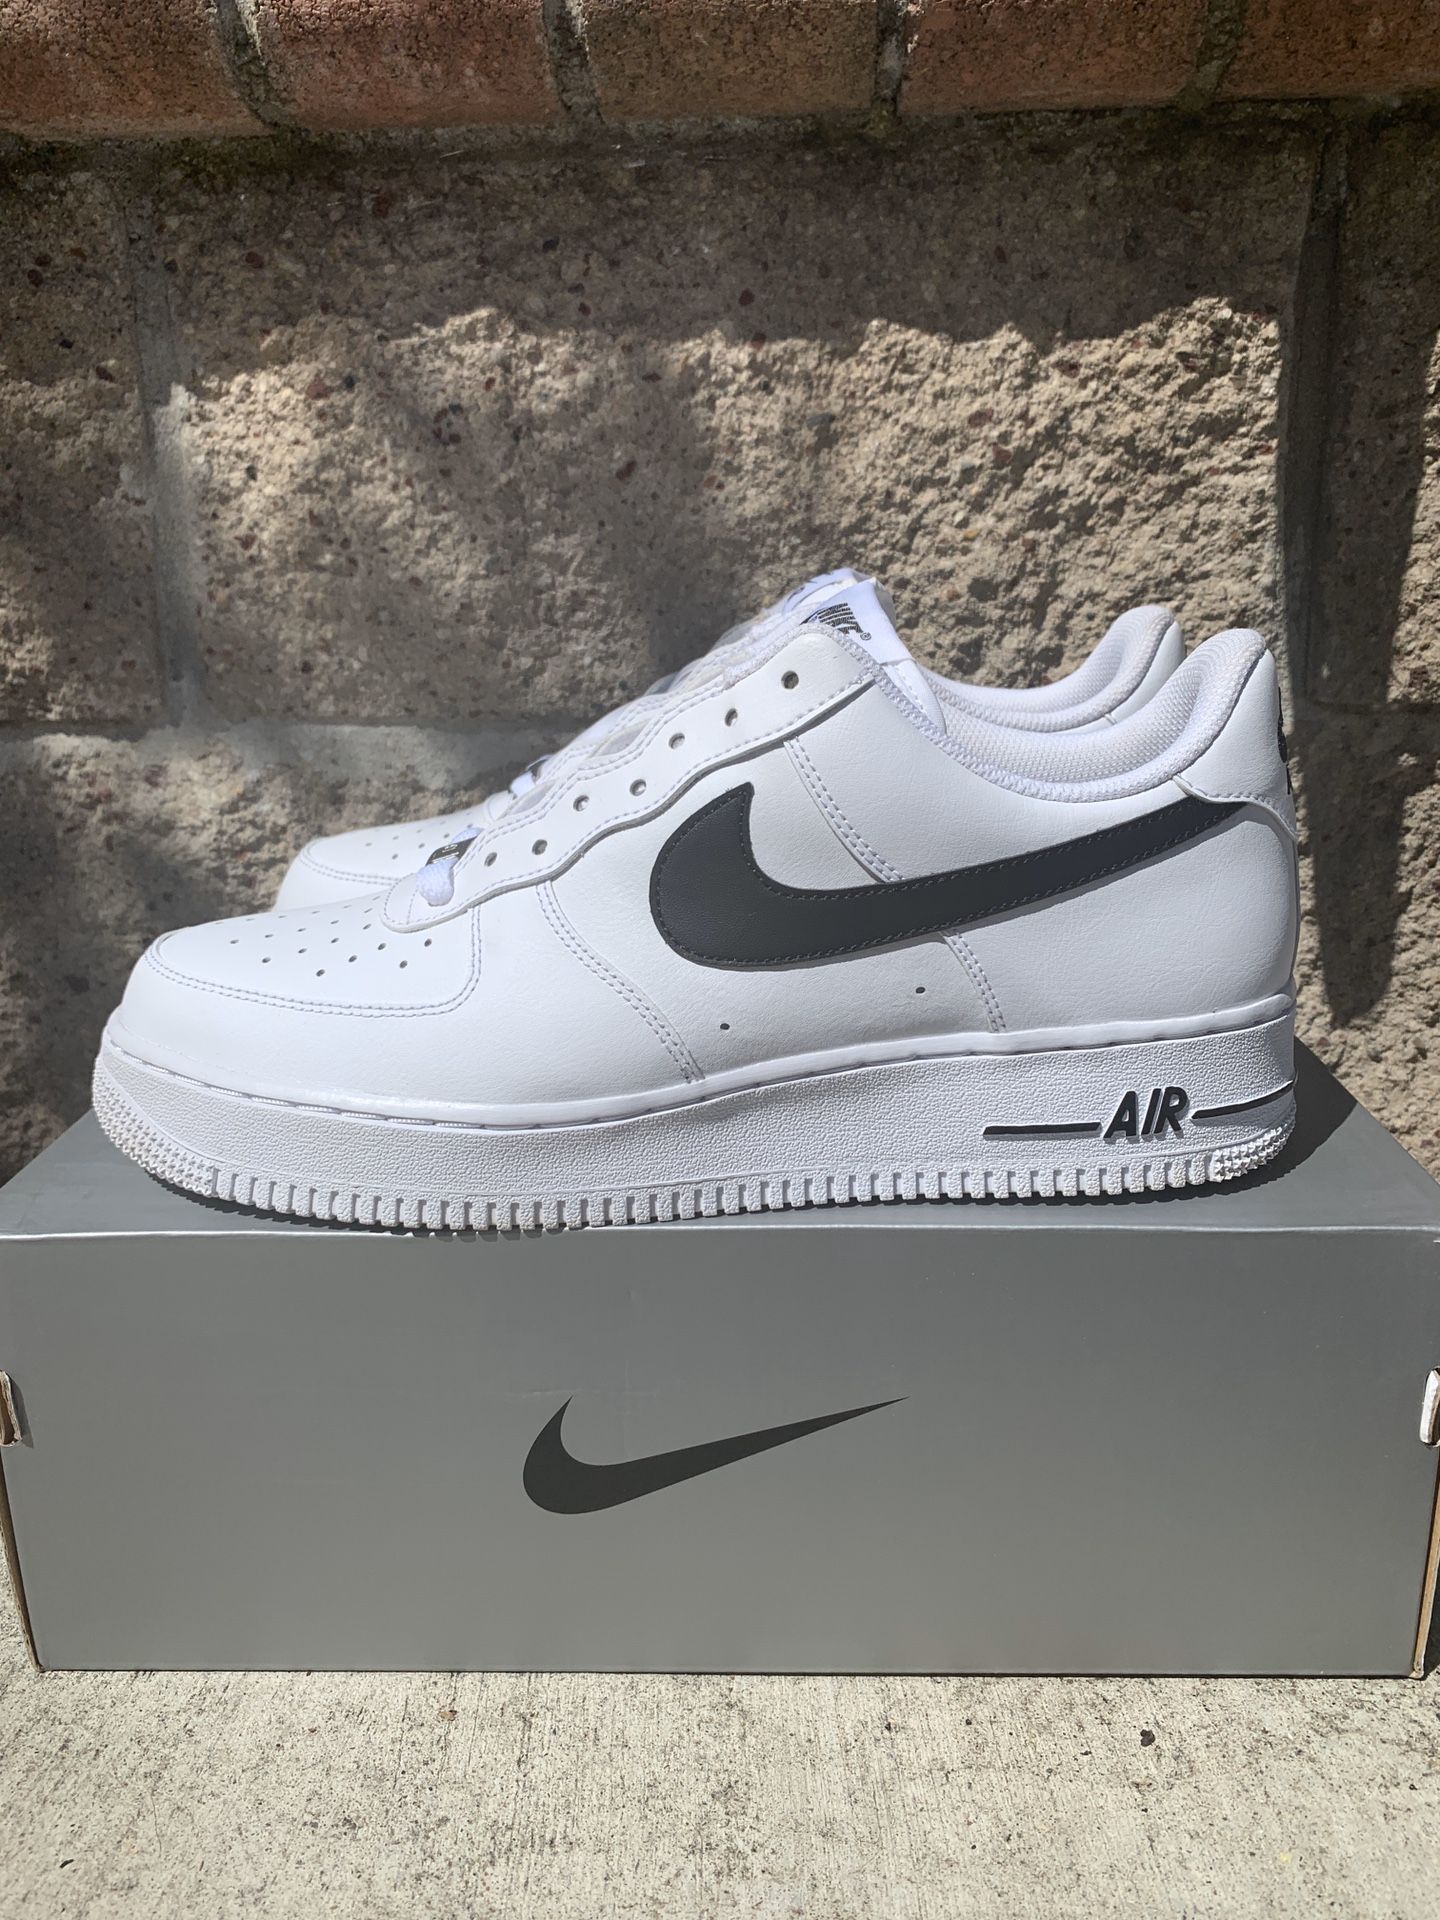 Nike Air Force low 07 white and black